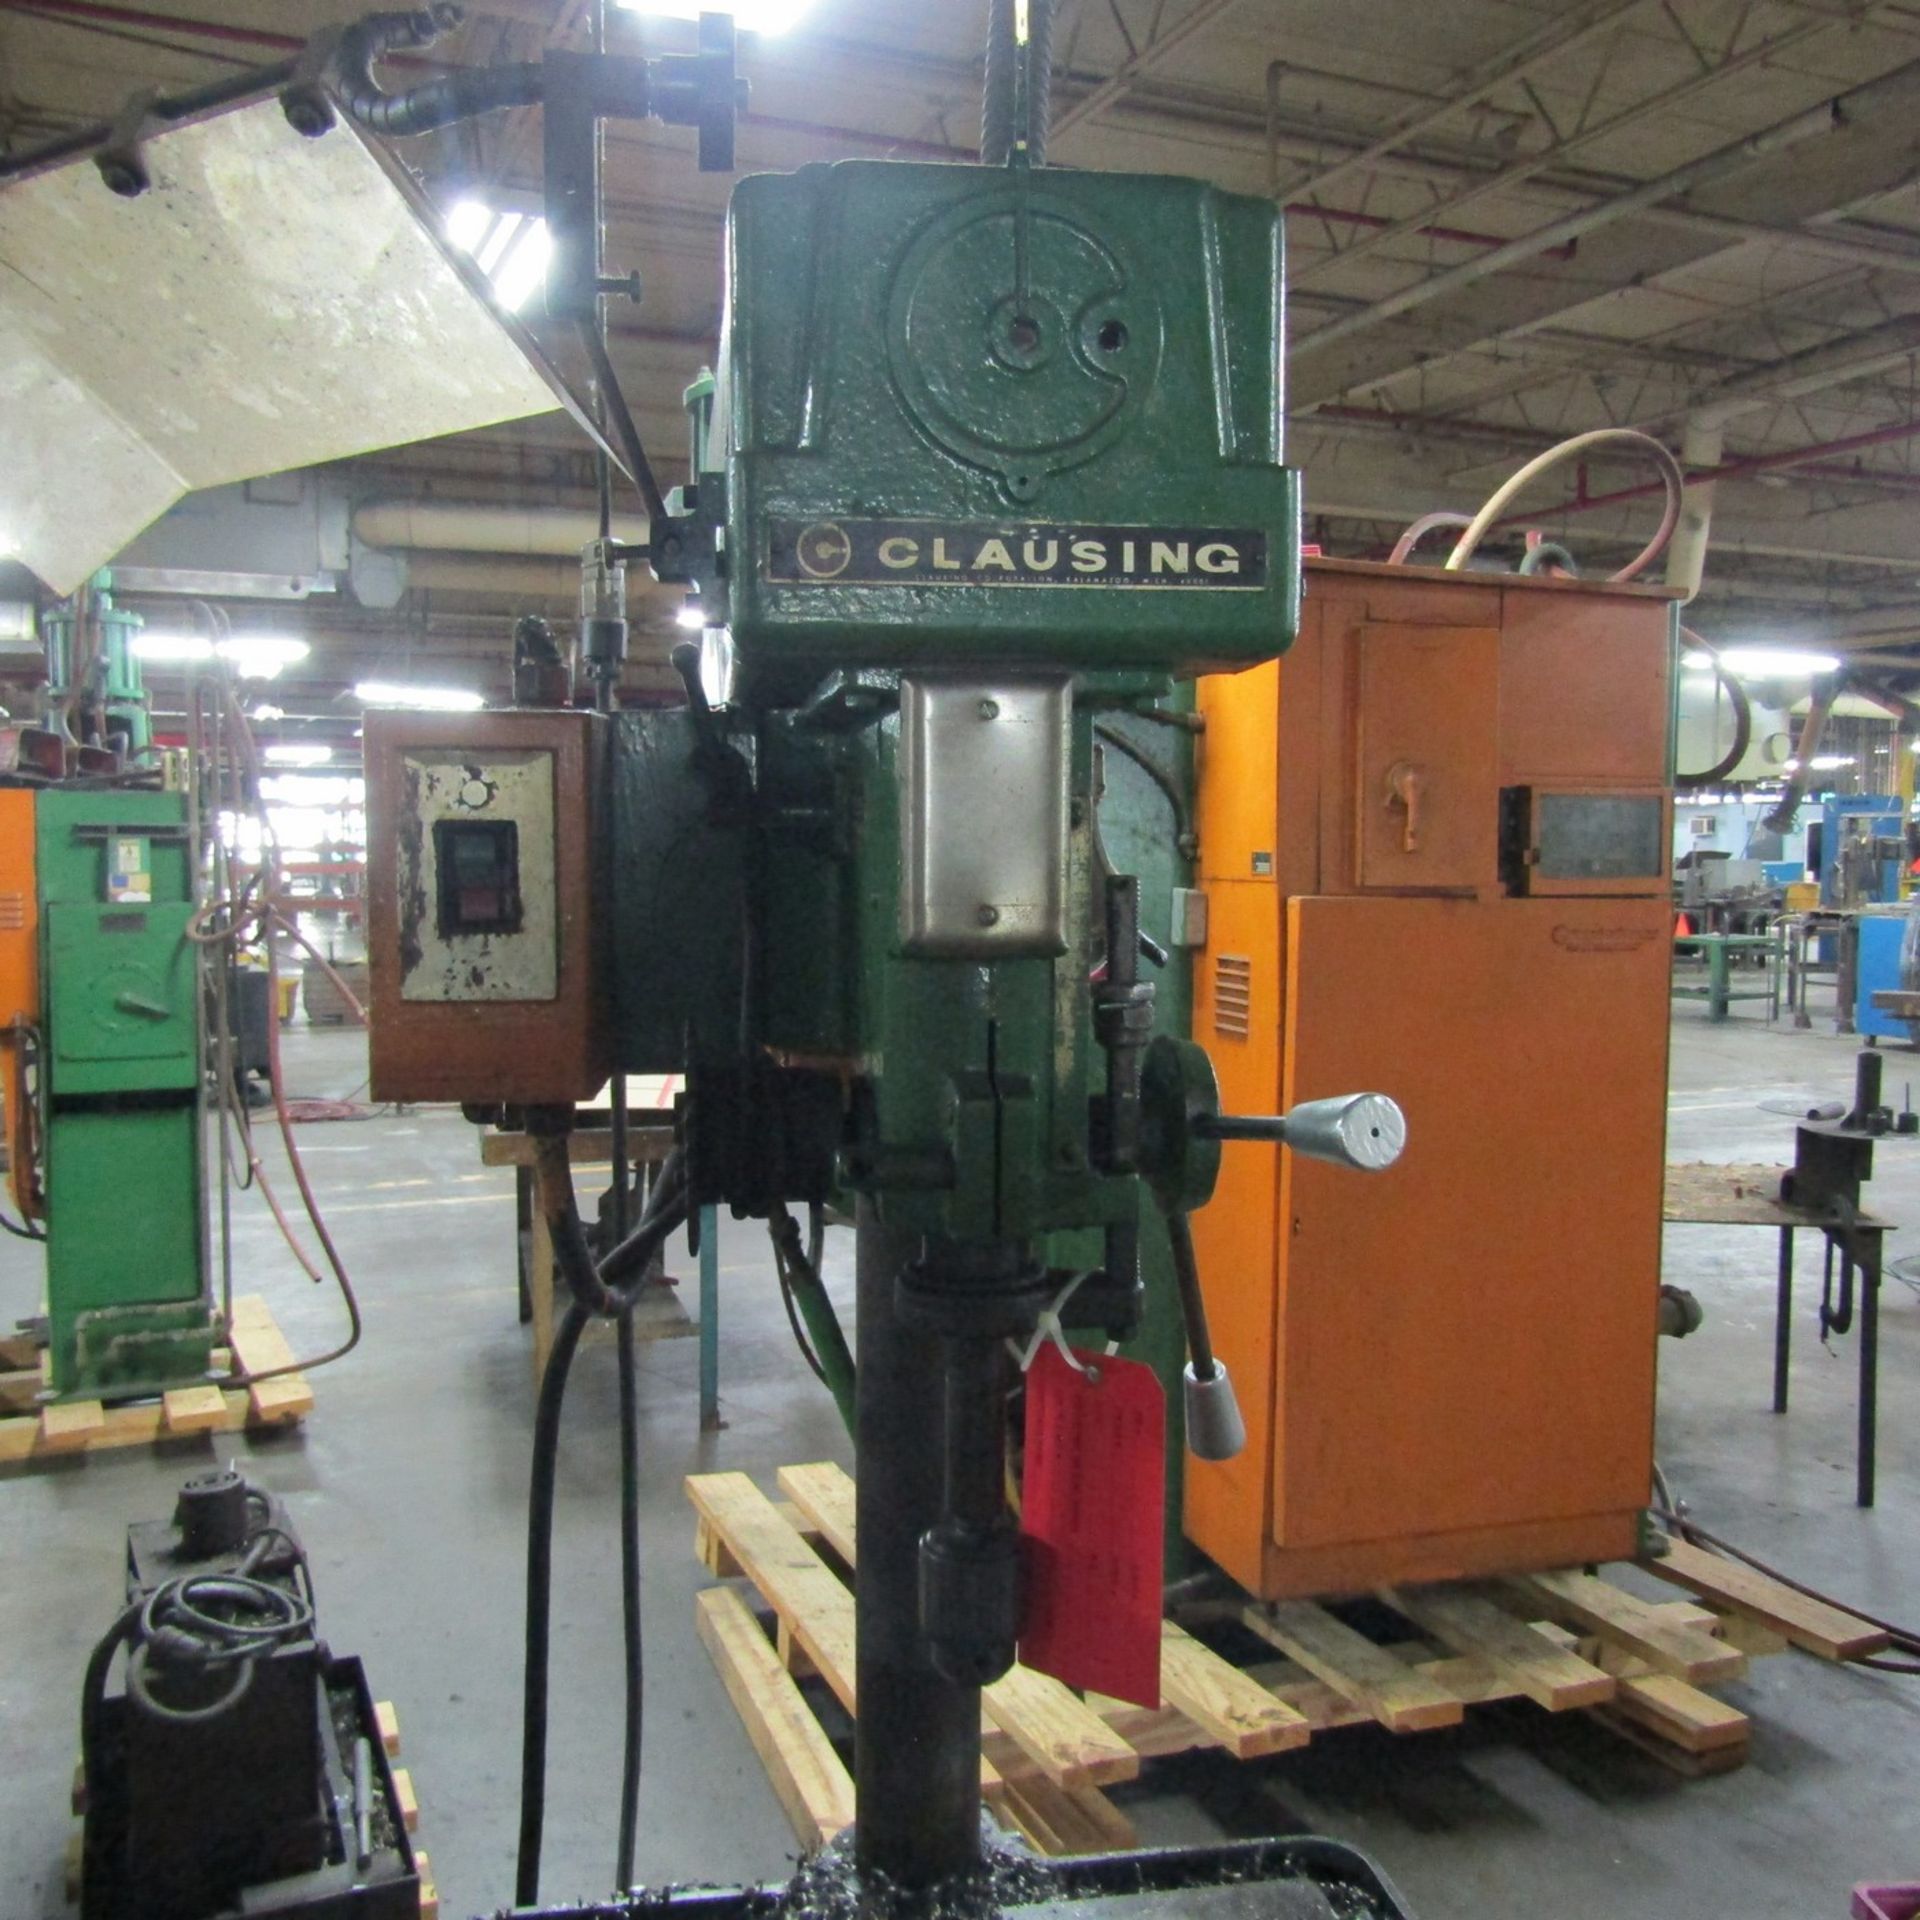 Clausing 15 in. Model 1763 Floor Type Drill Press, S/N: 524183; (Ref. #: 431) - Image 2 of 4